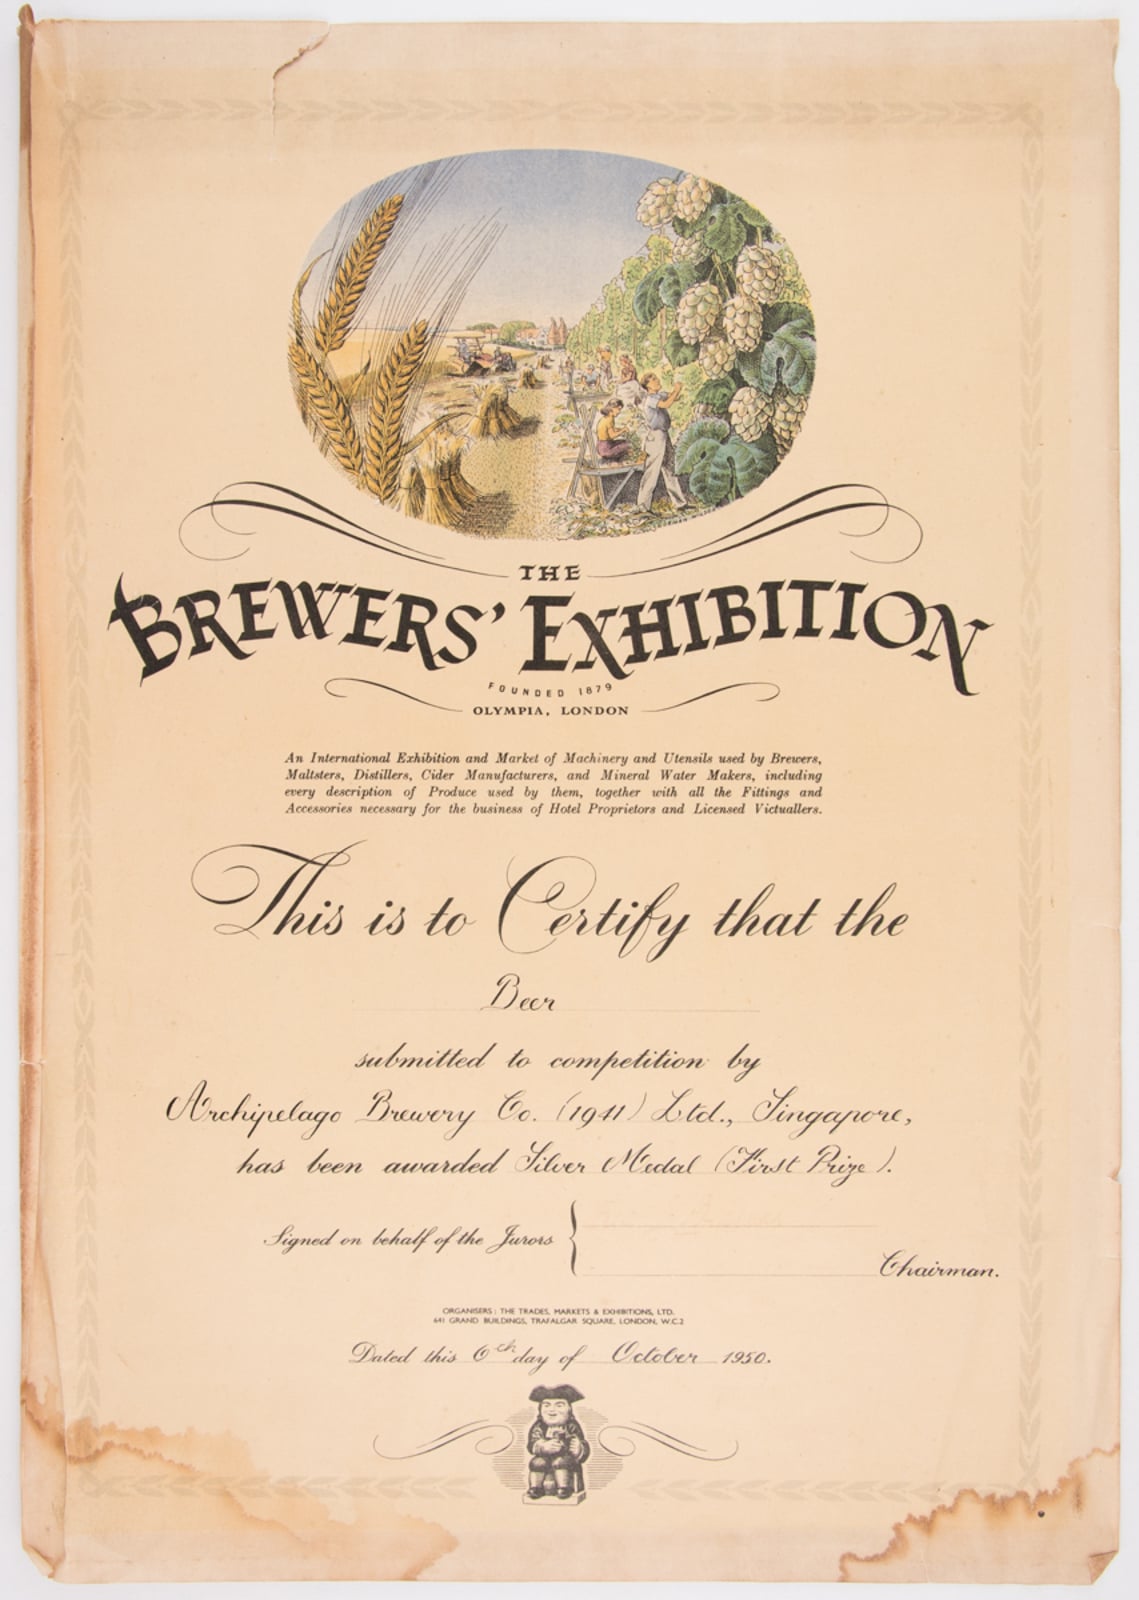 ABC Beer - Silver Medal (First Price), The Brewer's Exhbition Certificate 1950